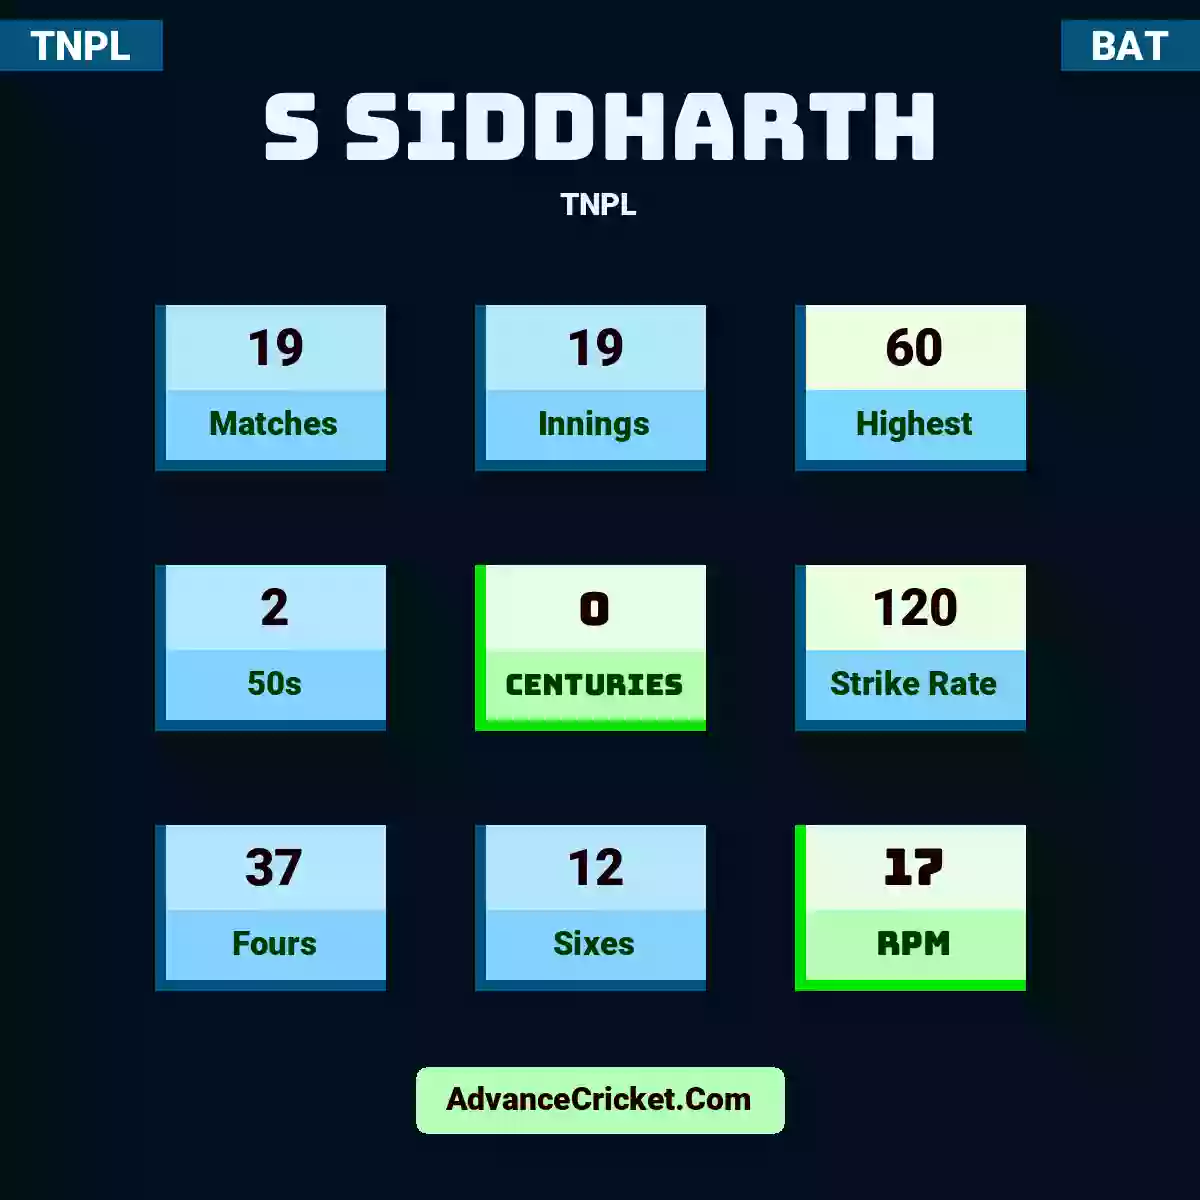 S Siddharth TNPL , S Siddharth played 19 matches, scored 60 runs as highest, 2 half-centuries, and 0 centuries, with a strike rate of 120. S.Siddharth hit 37 fours and 12 sixes, with an RPM of 17.